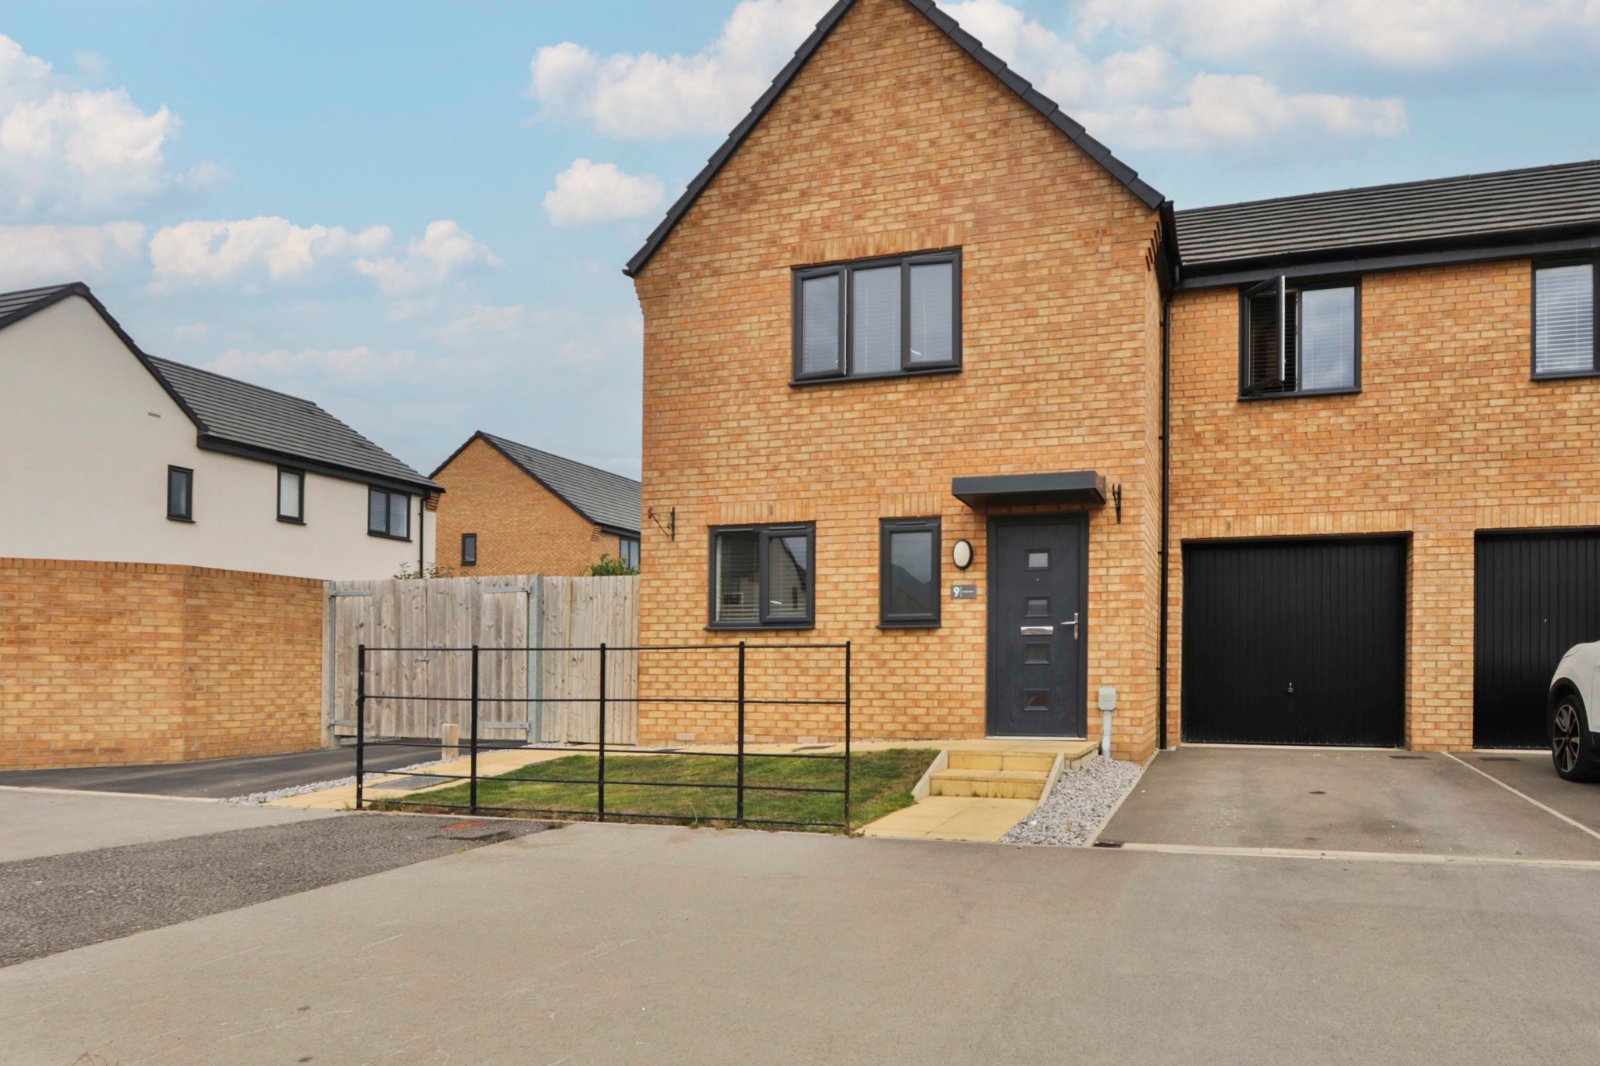 4 bed house for sale in Diversity Drive, Kingswood, HU7 